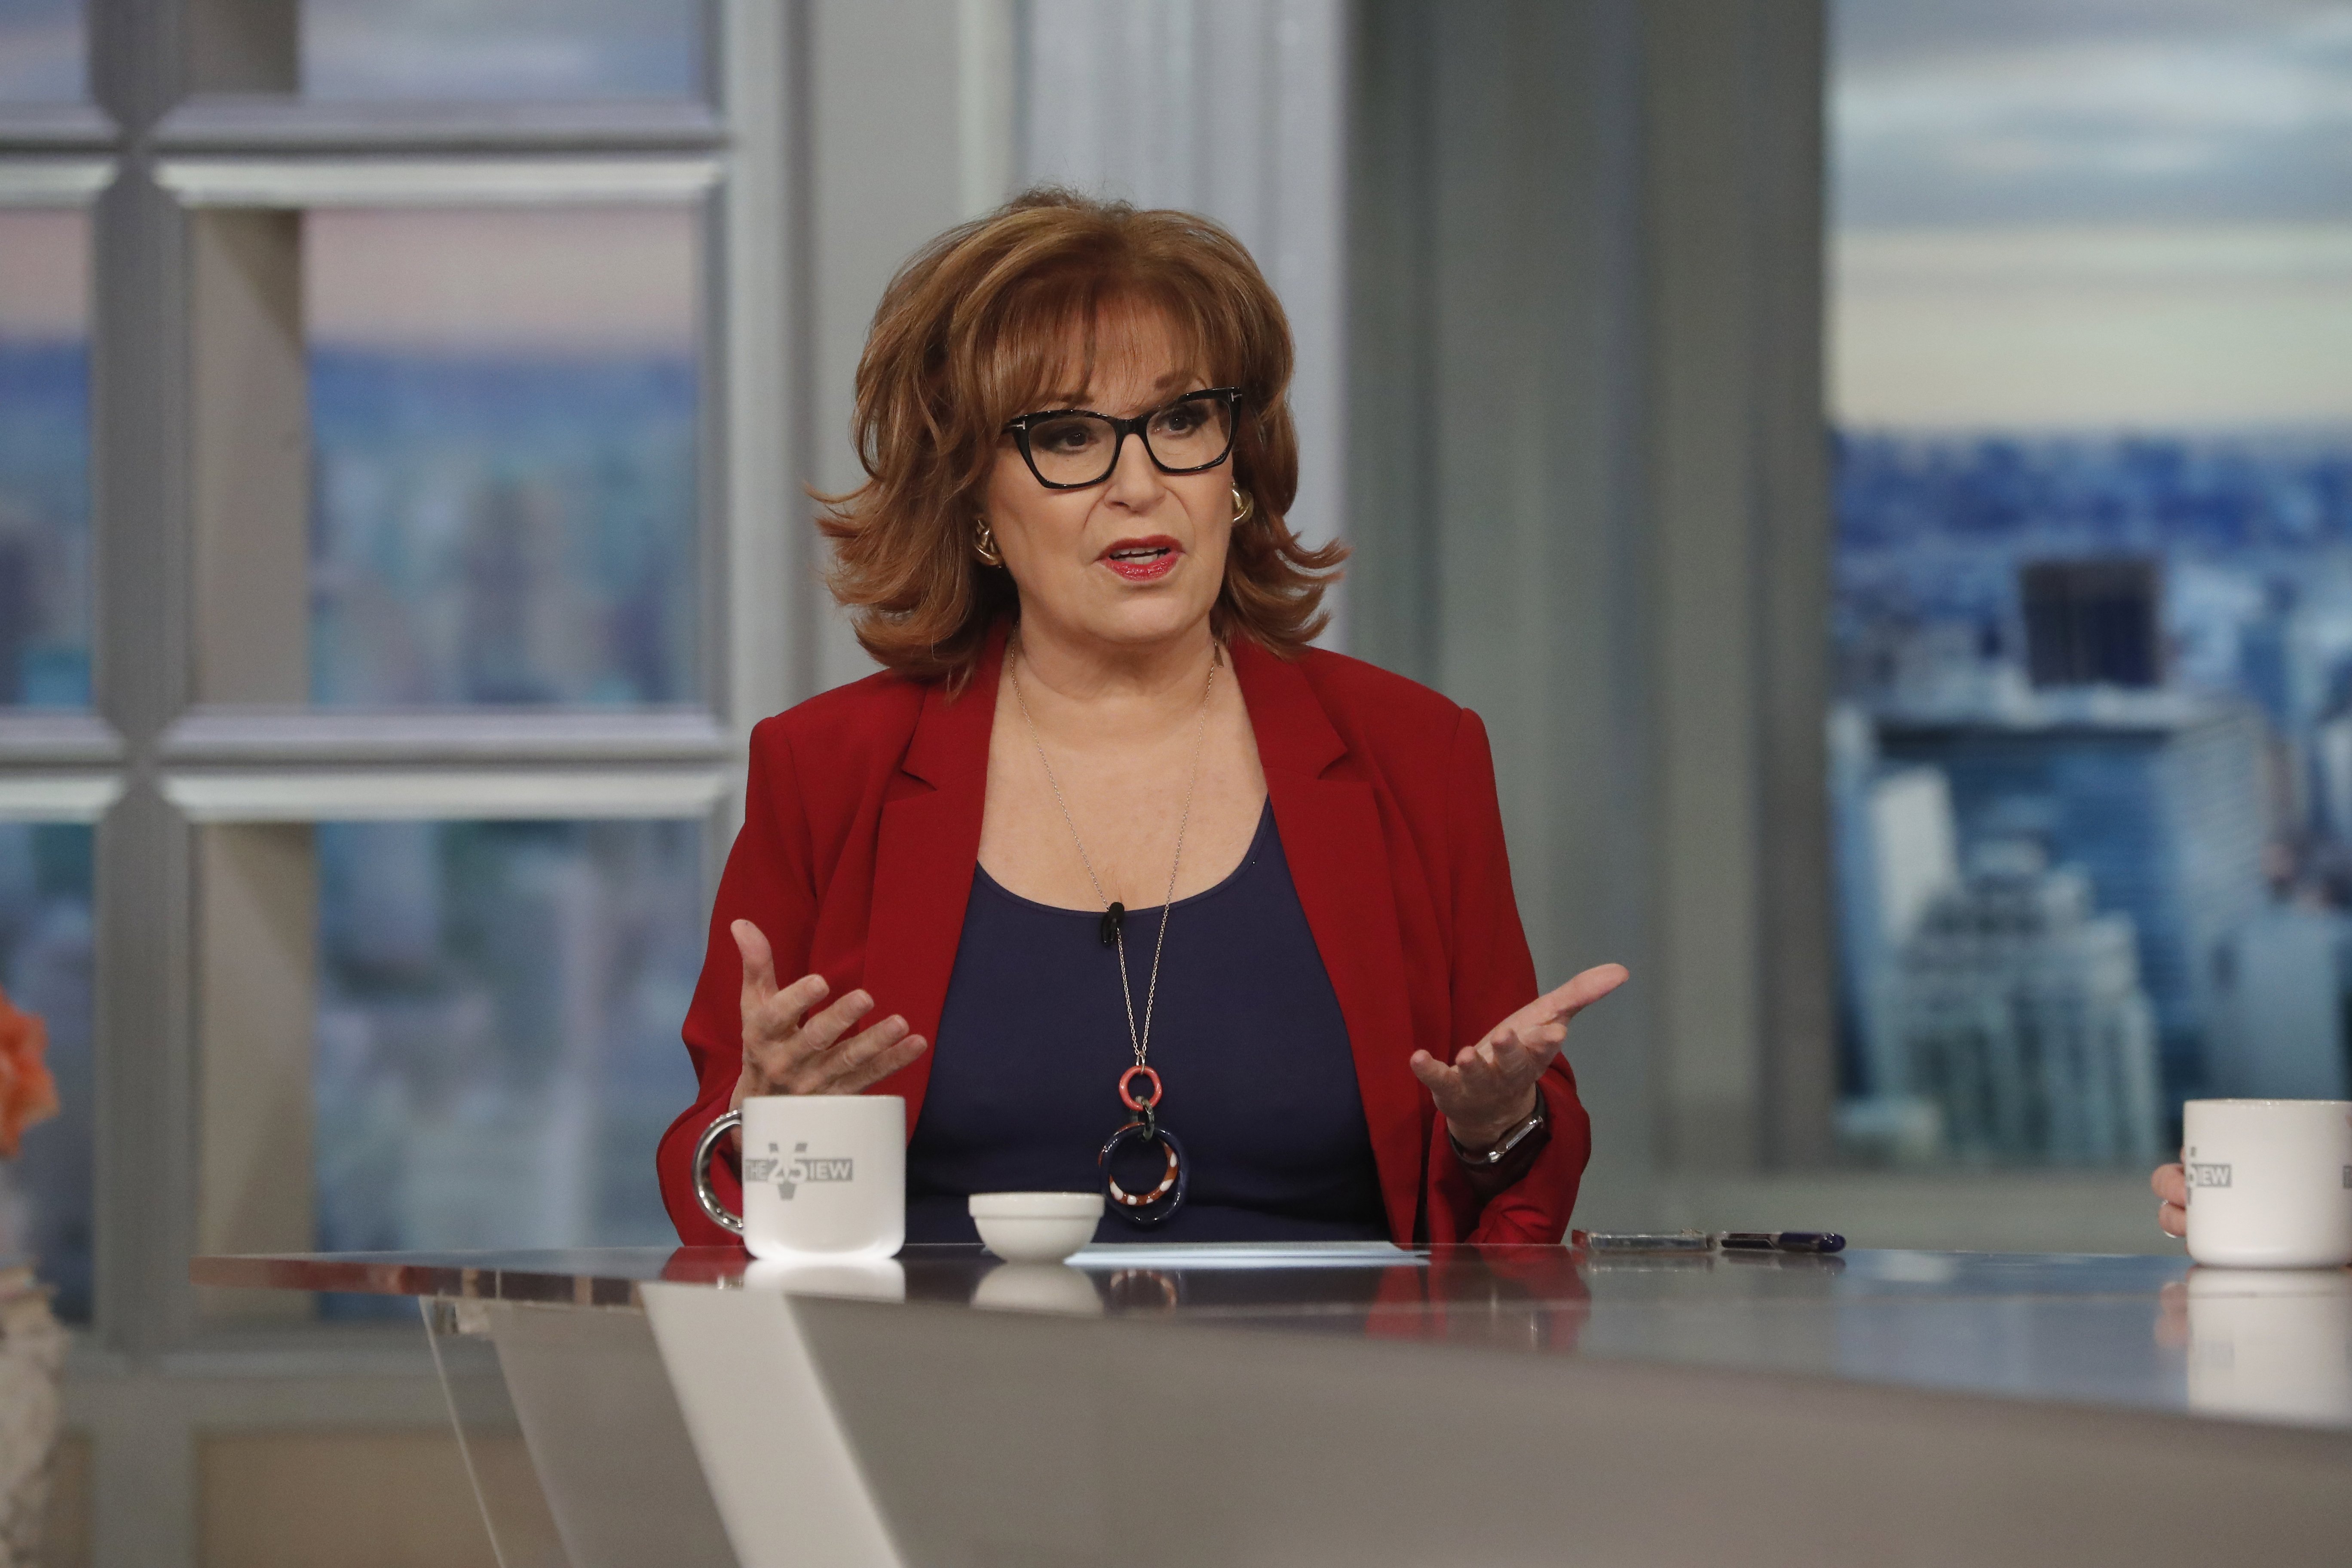 Joy Behar on an episode of "The View" aired on May 6 2022 | Source: Getty Images